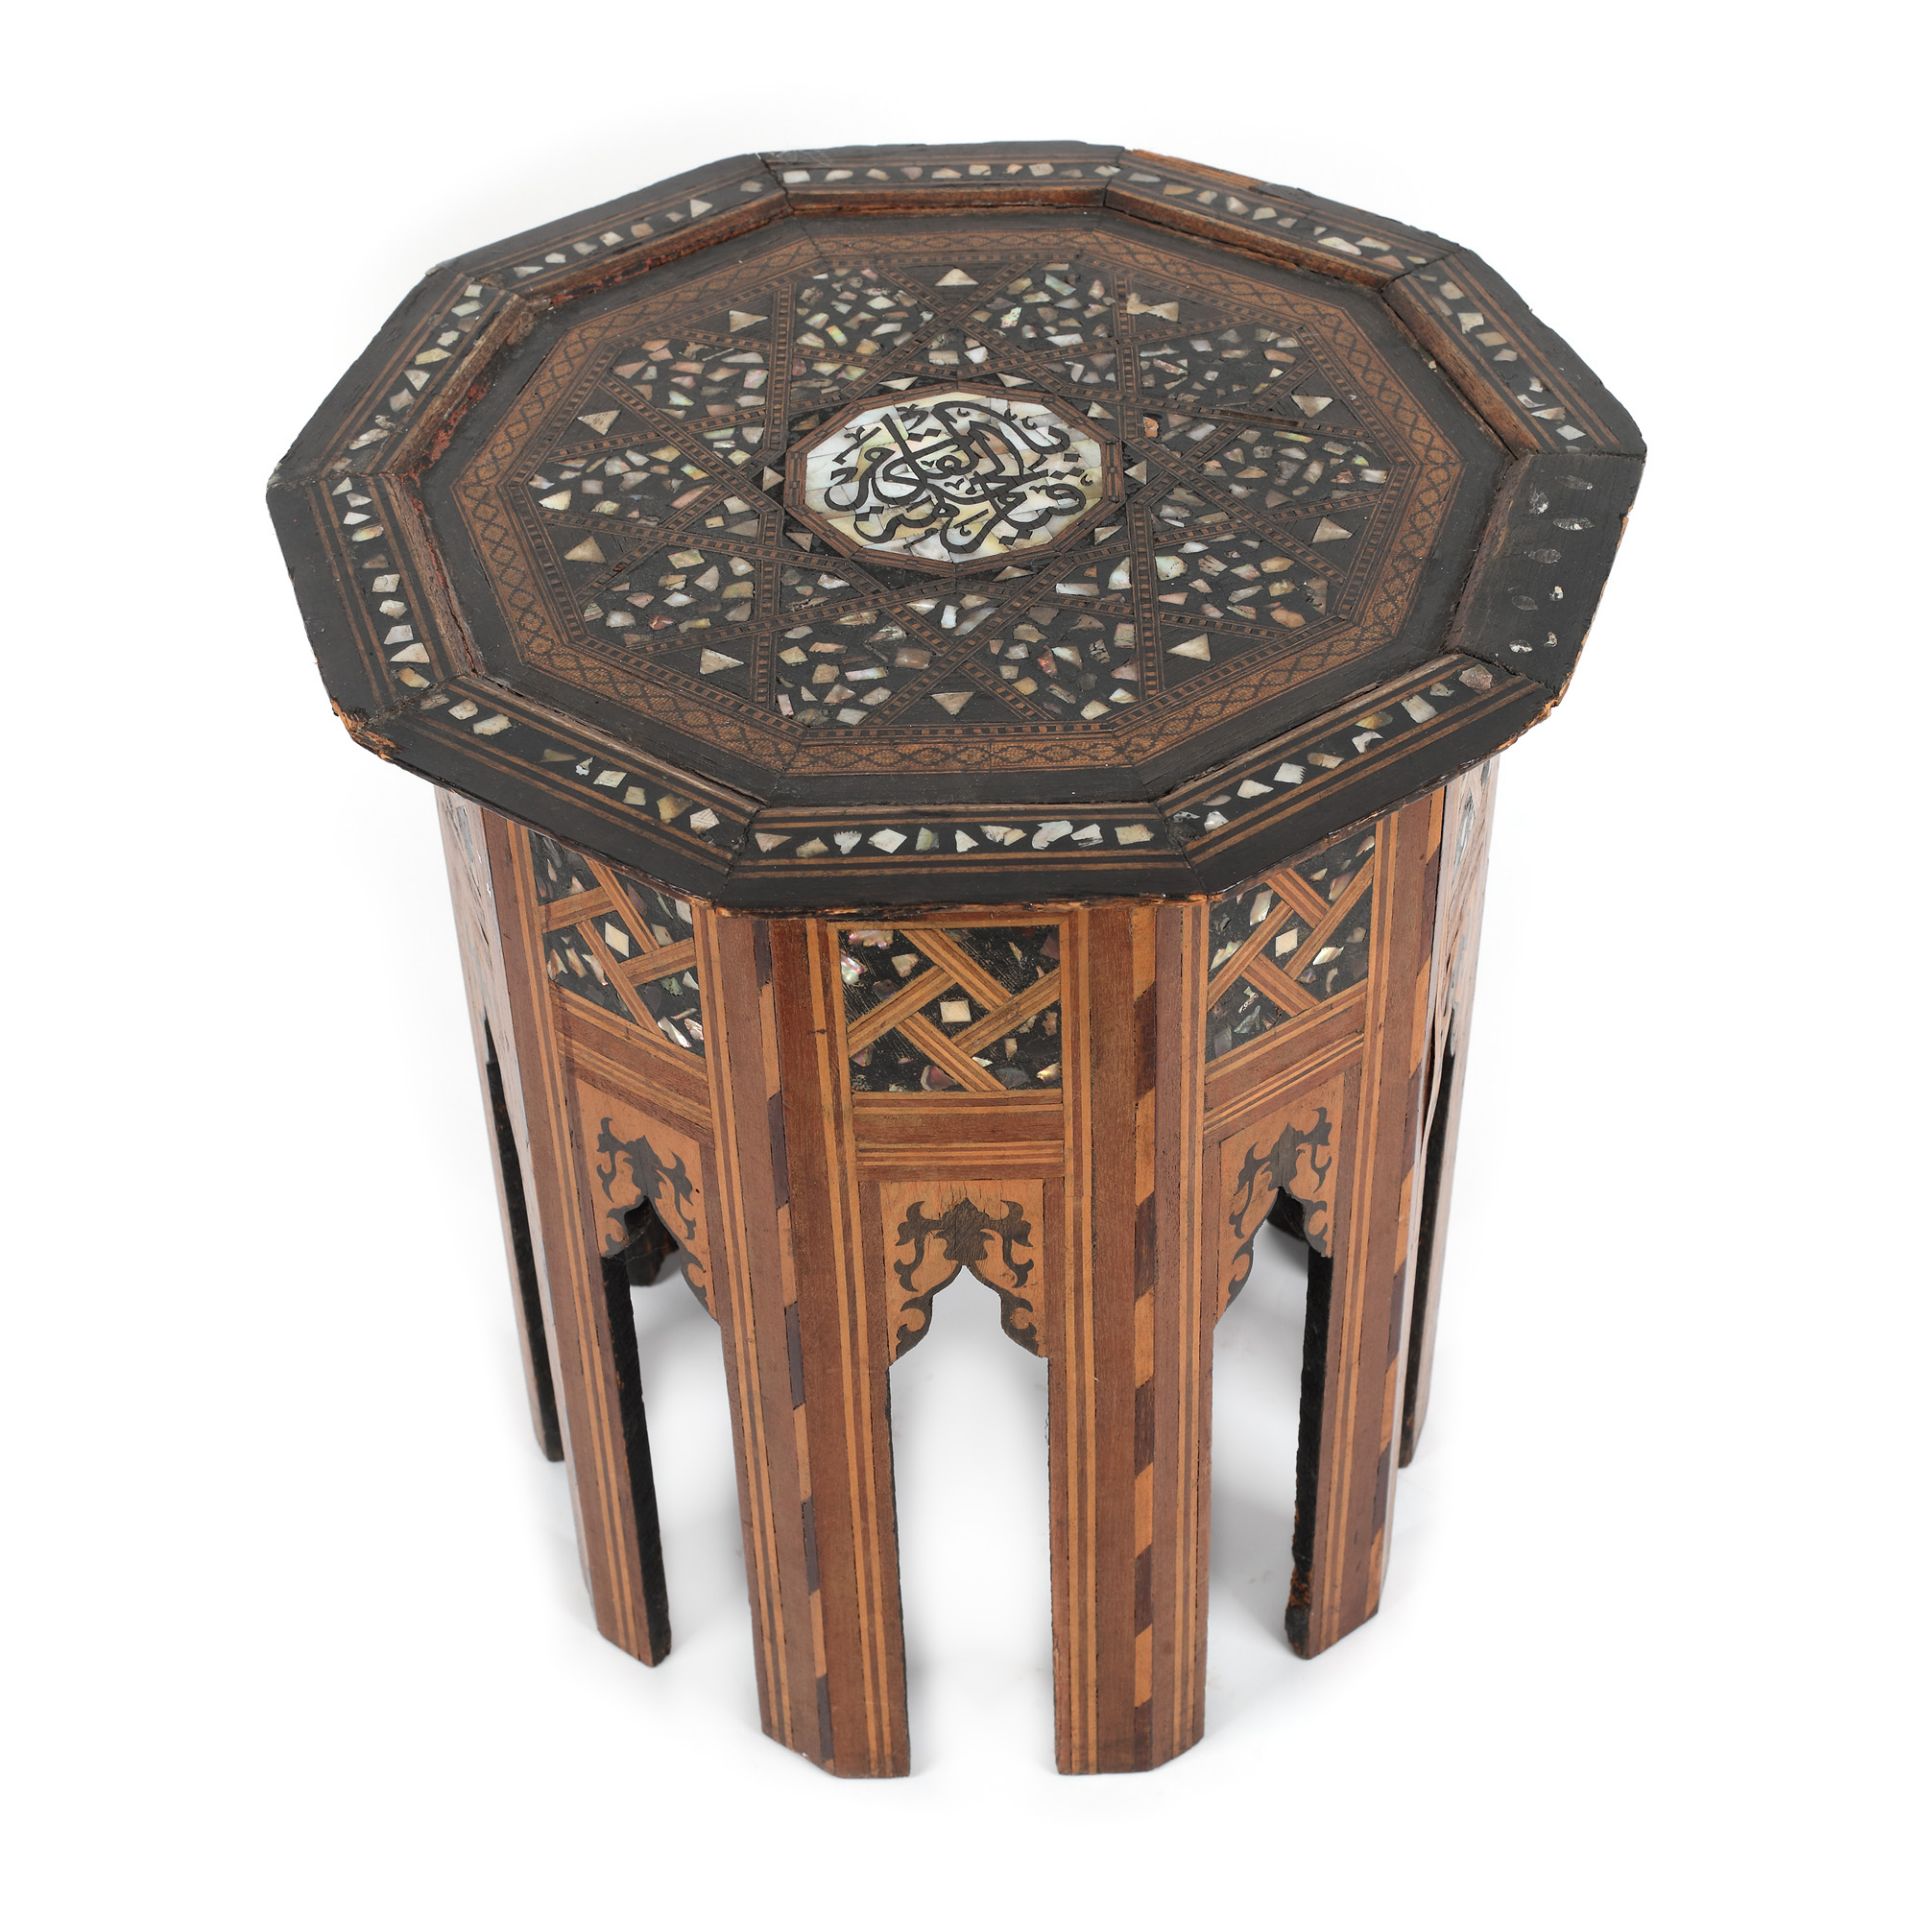 Coffee table, centrally decorated with Arabic calligraphy and mother-of-pearl inlays, Syria, early 2